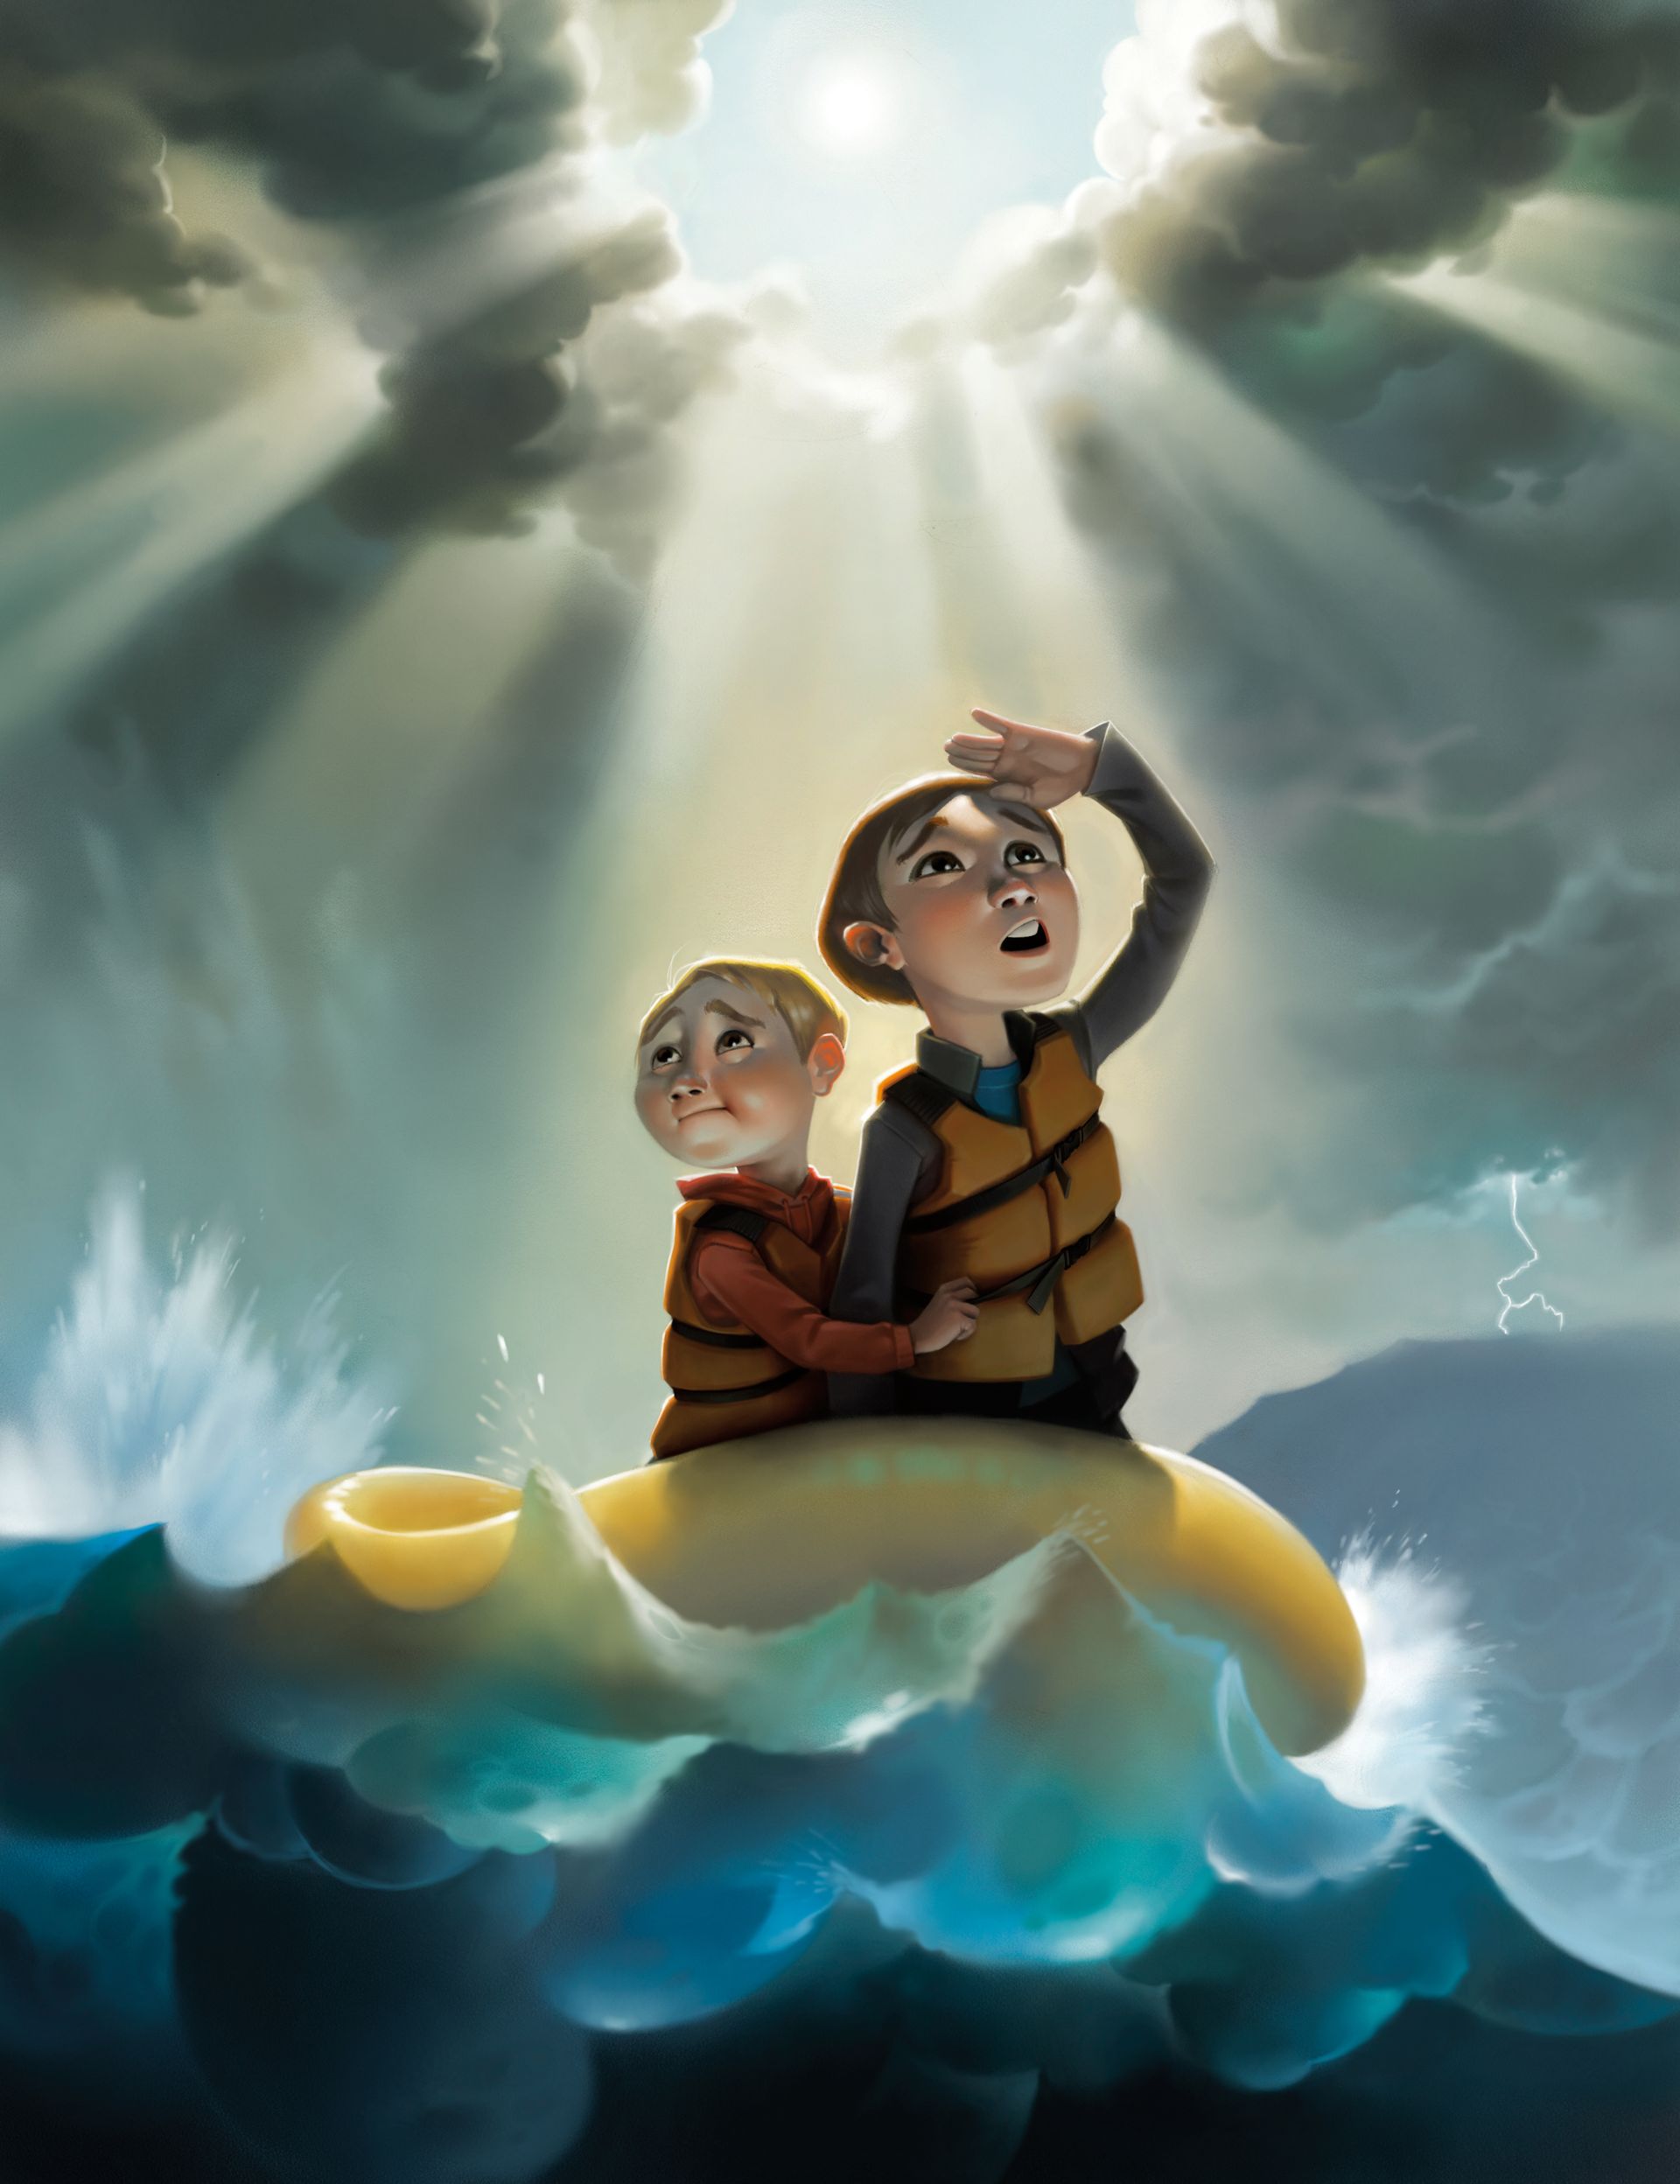 Two boys float in a raft during stormy weather on the sea.